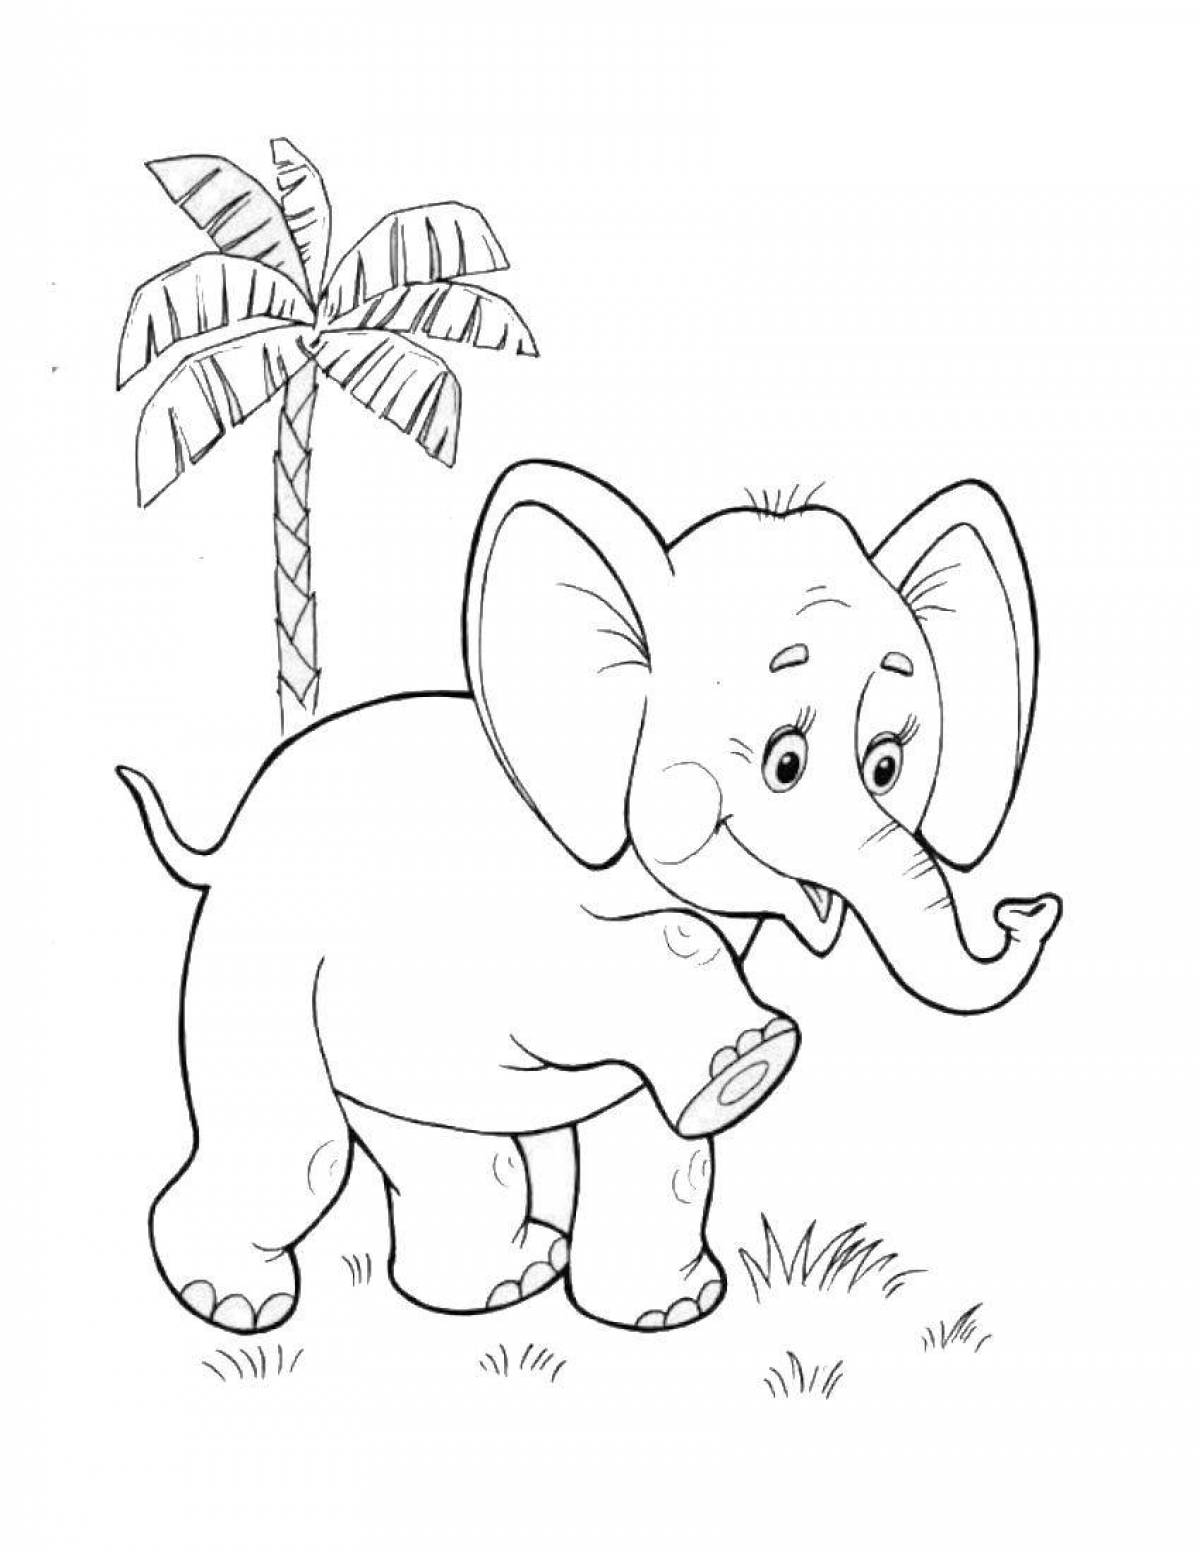 Adorable coloring pages animals of hot countries for children 5-6 years old